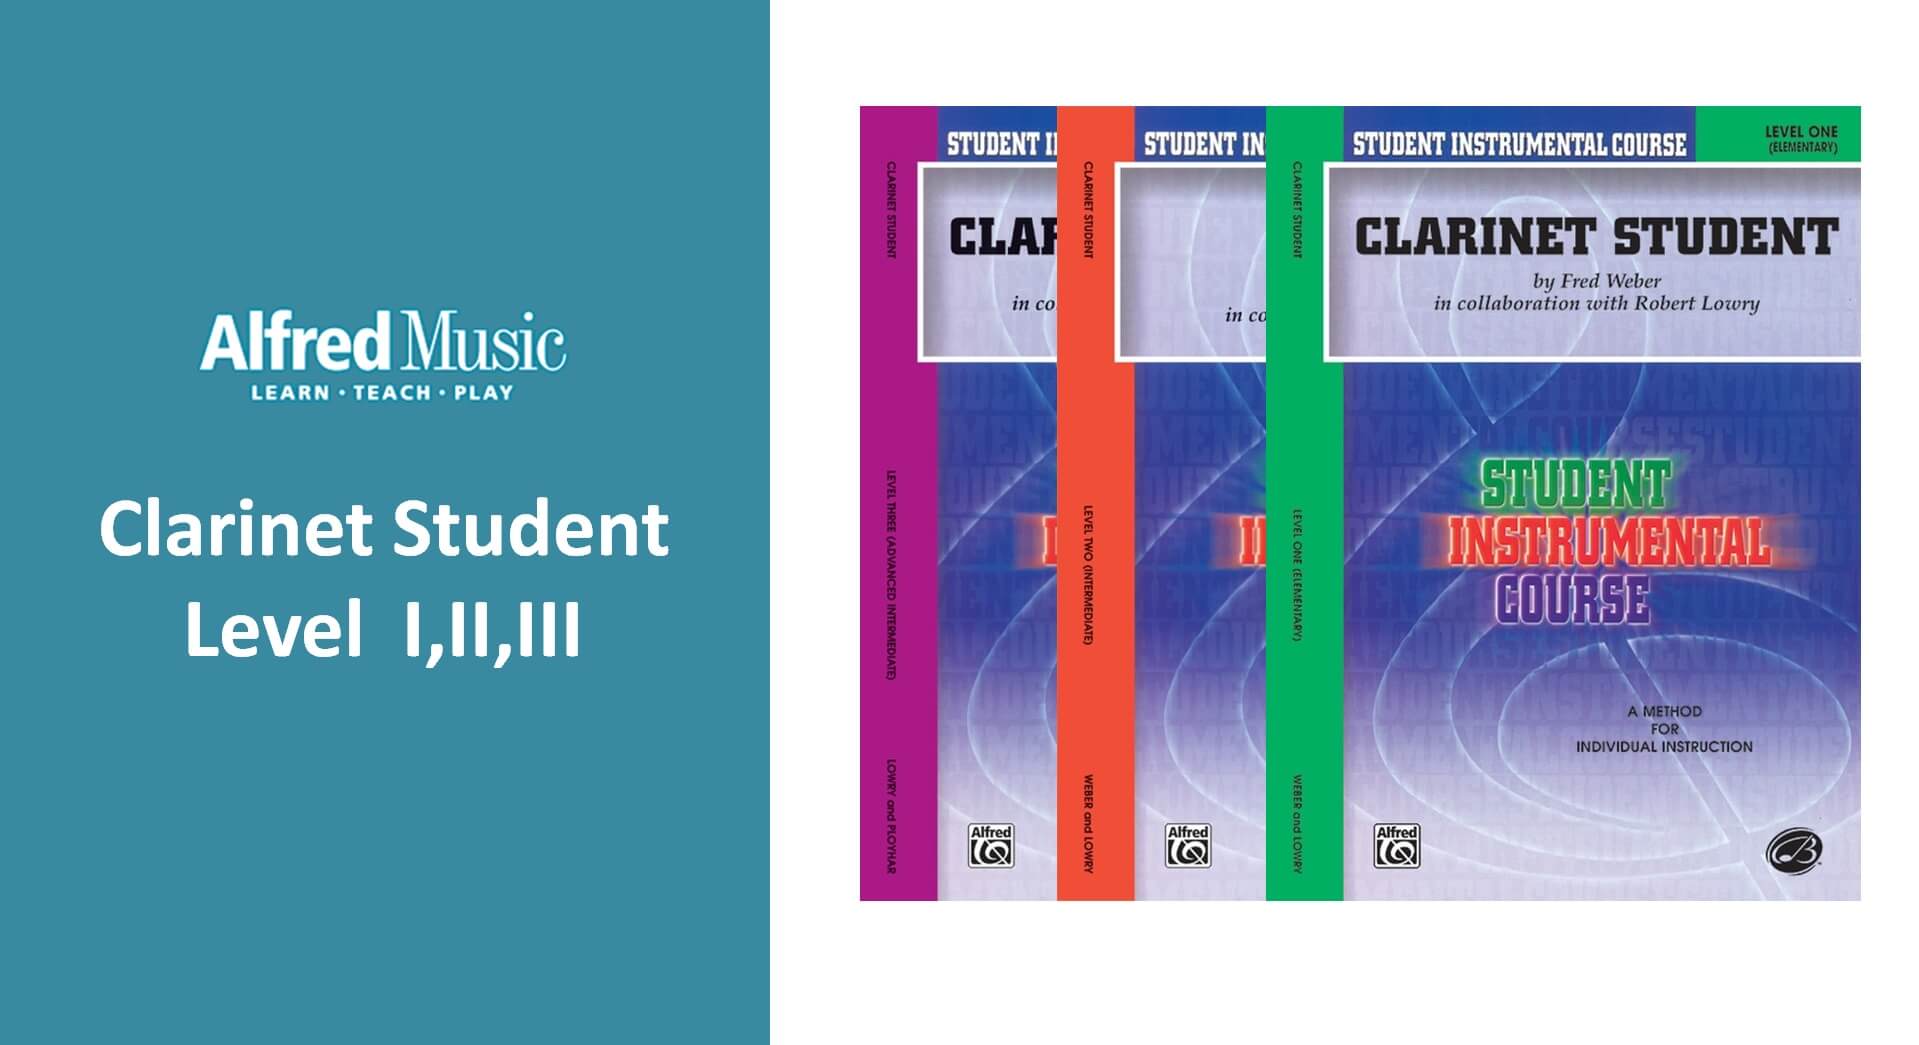 Student Instrumental Course: Clarinet Student